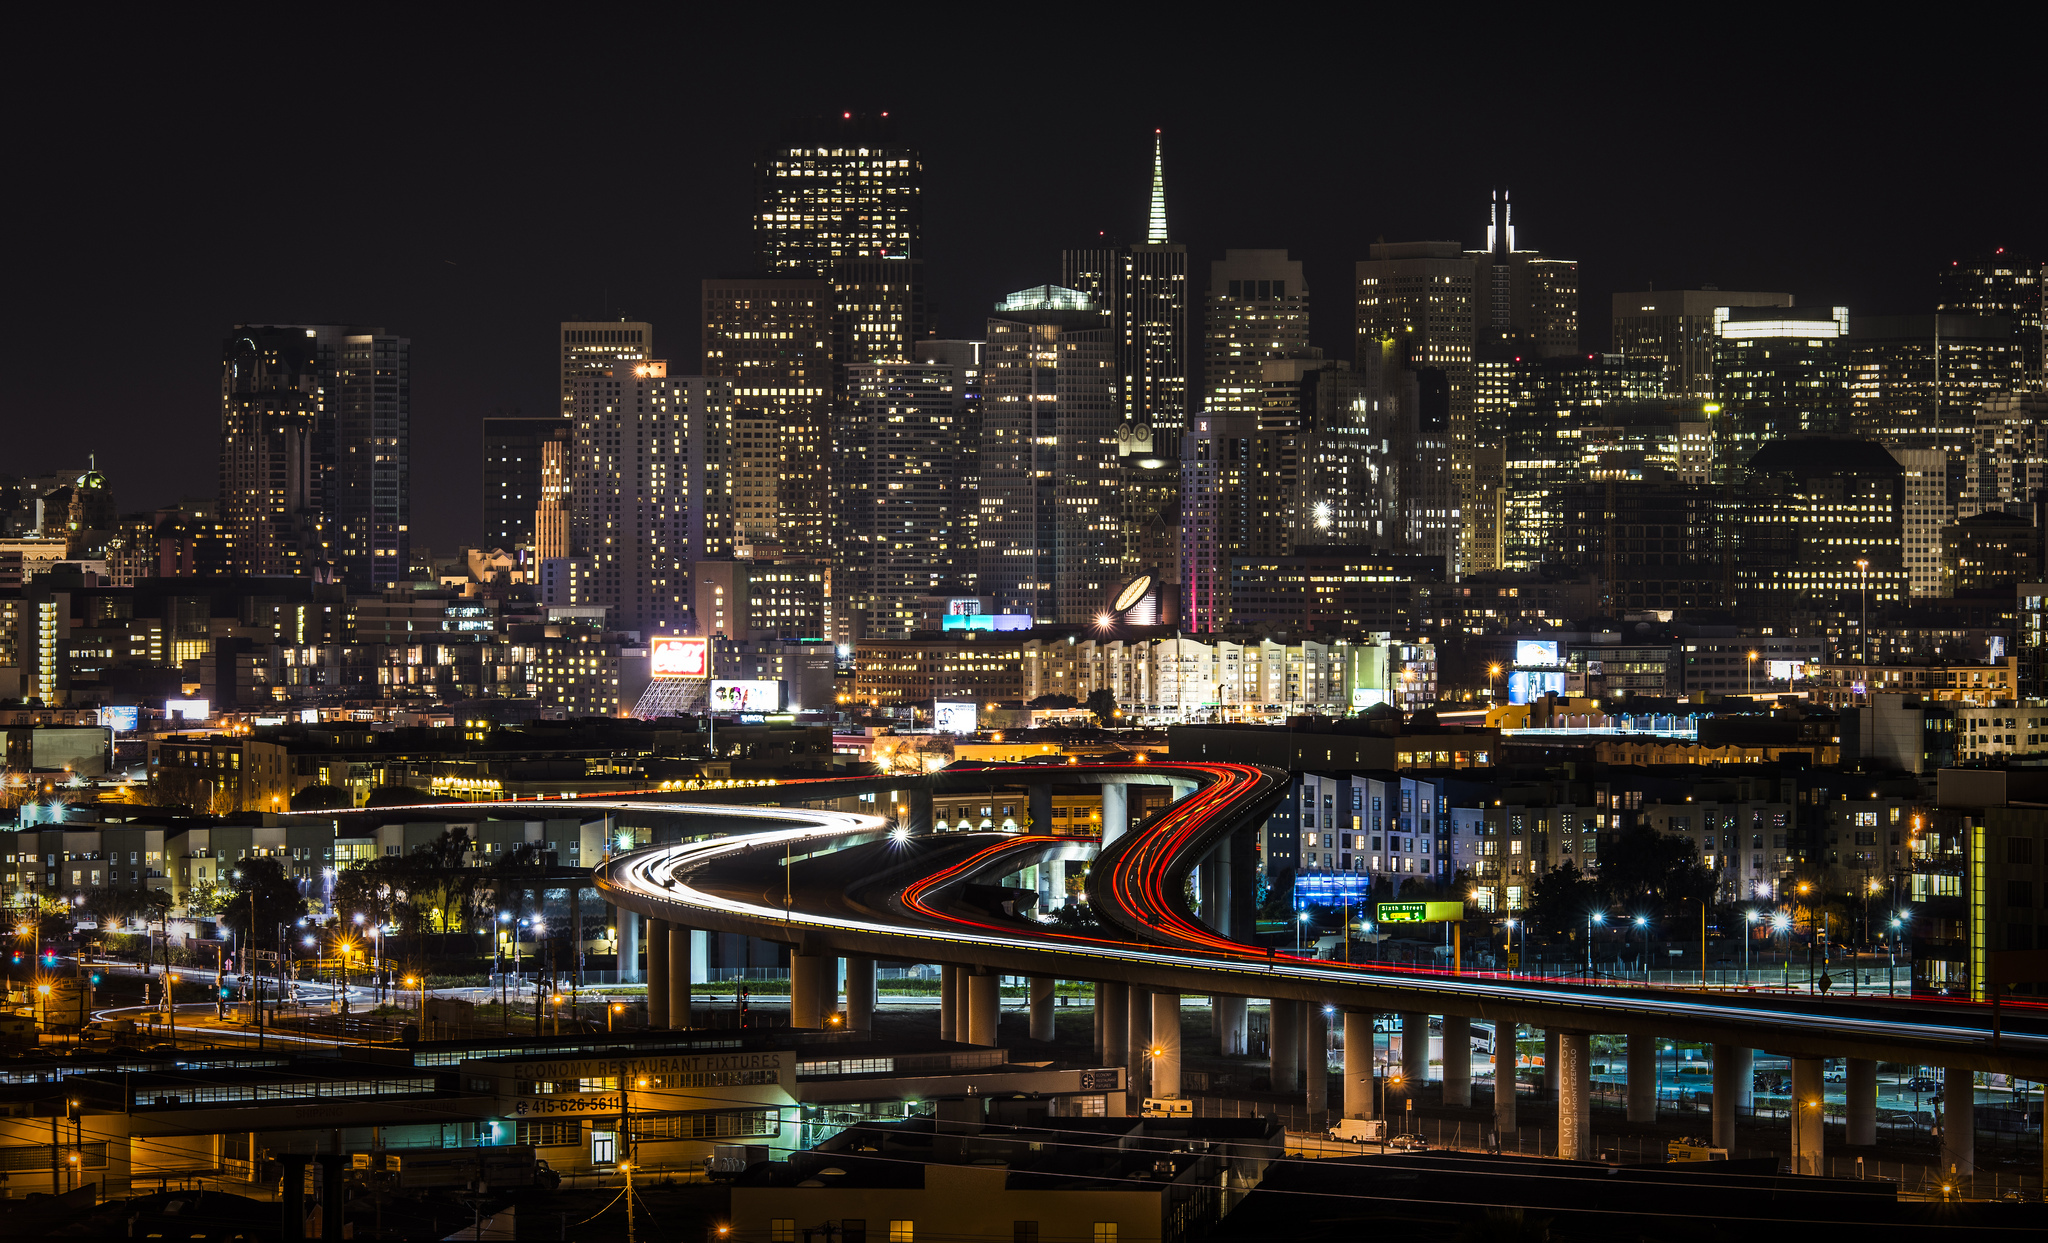 man made, san francisco, building, city, highway, light, night, skyscraper, time lapse, usa, cities wallpapers for tablet